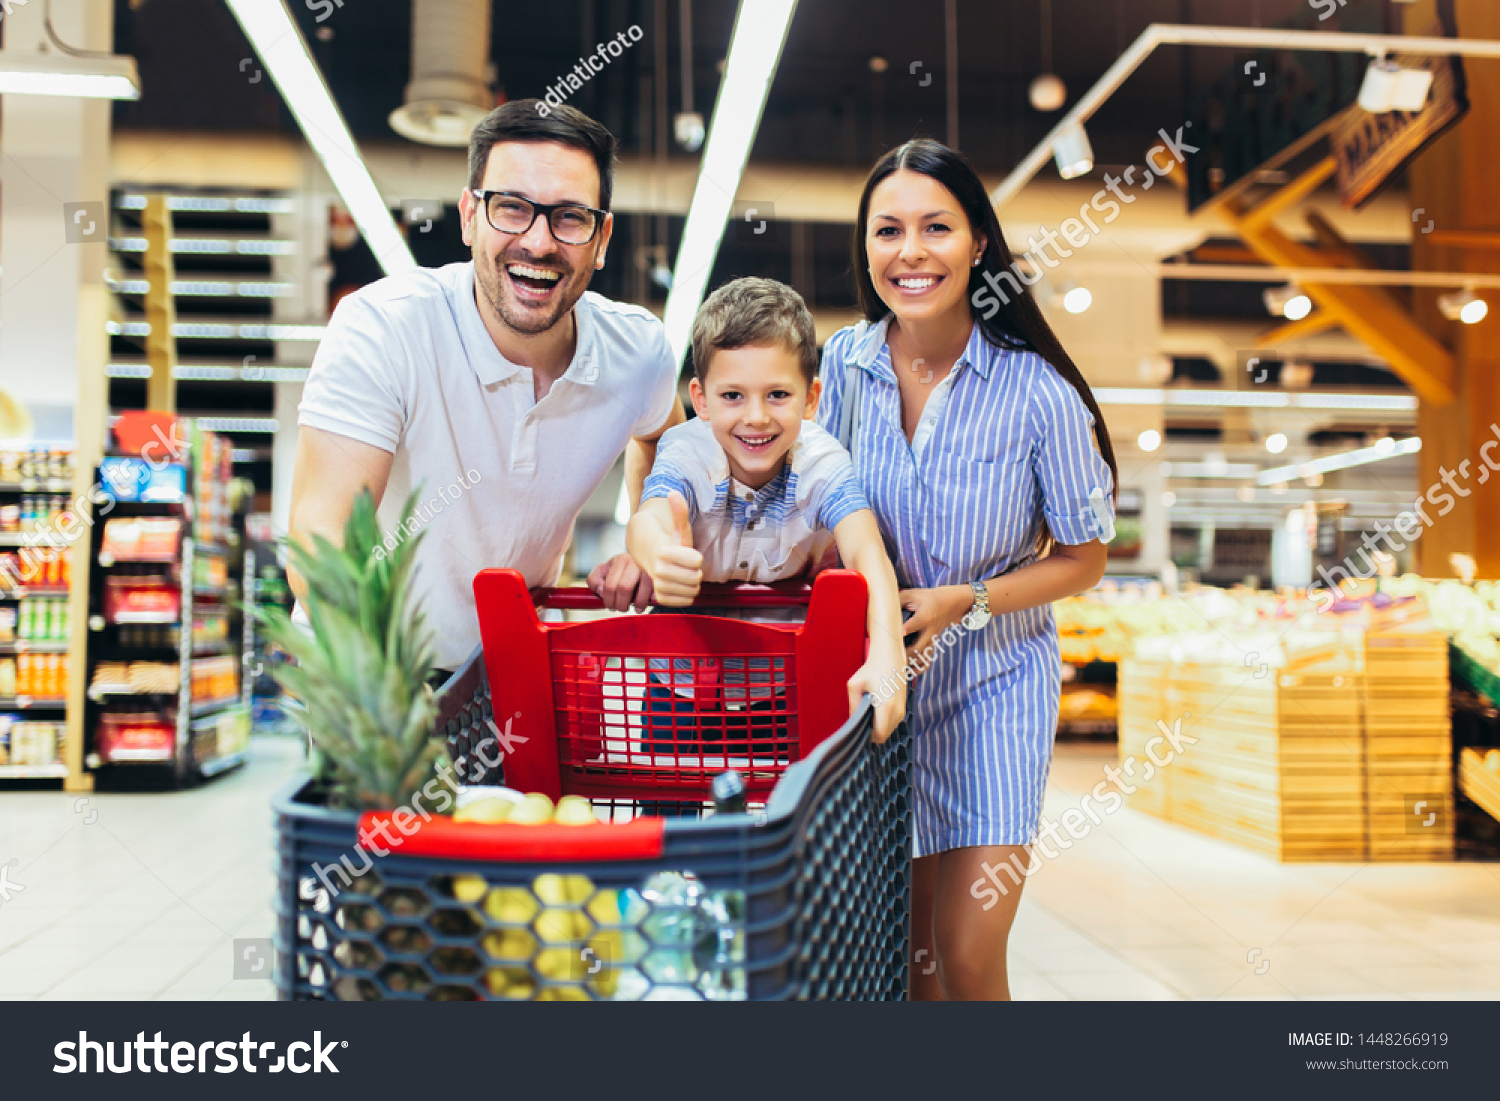 Happy family with child and shopping cart buying food at grocery store or supermarket #1448266919